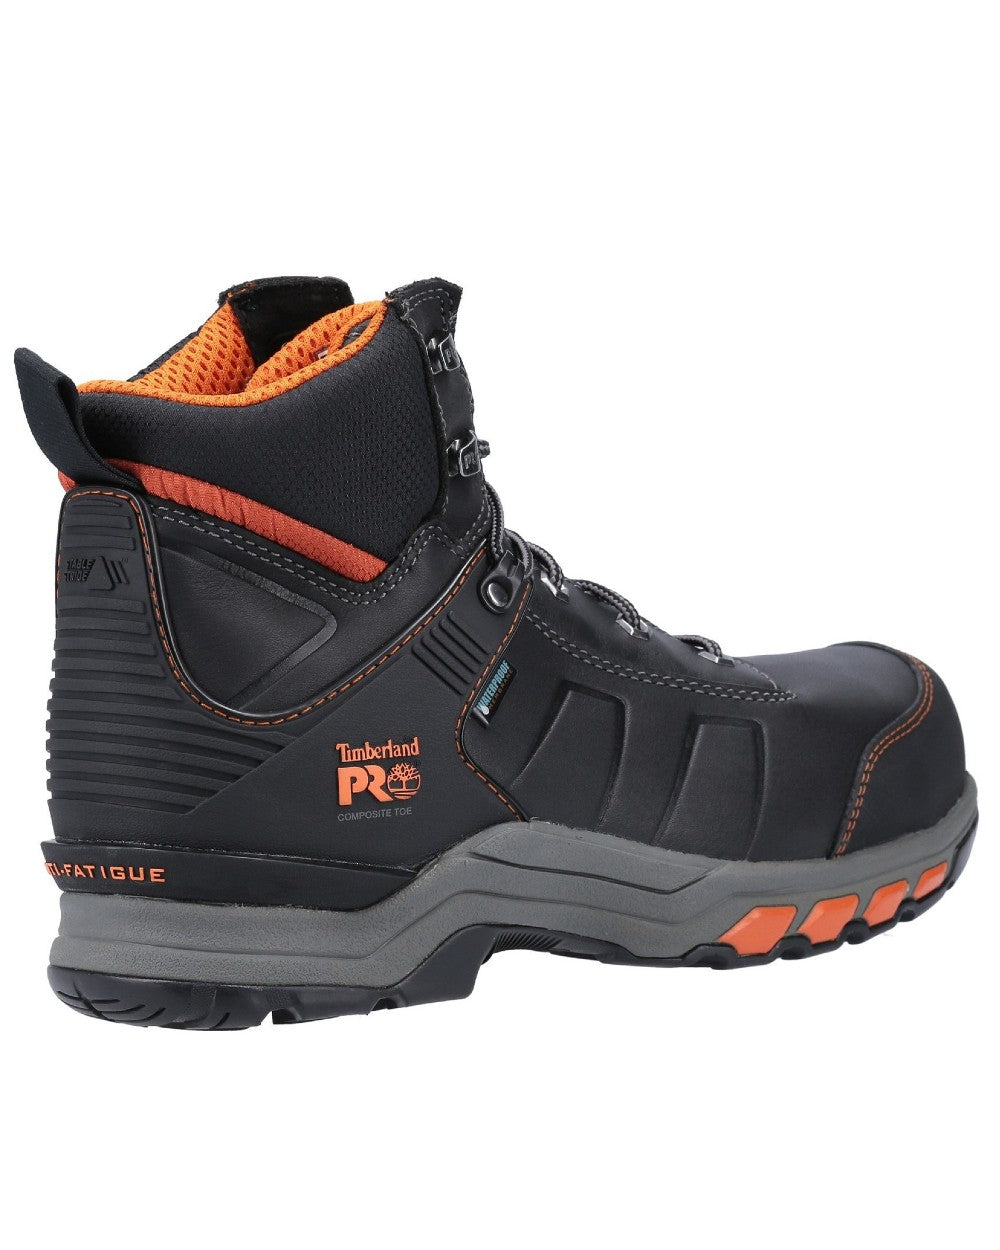 Black/Orange Timberland Pro Hypercharge Composite Safety Toe Work Boots on white background 